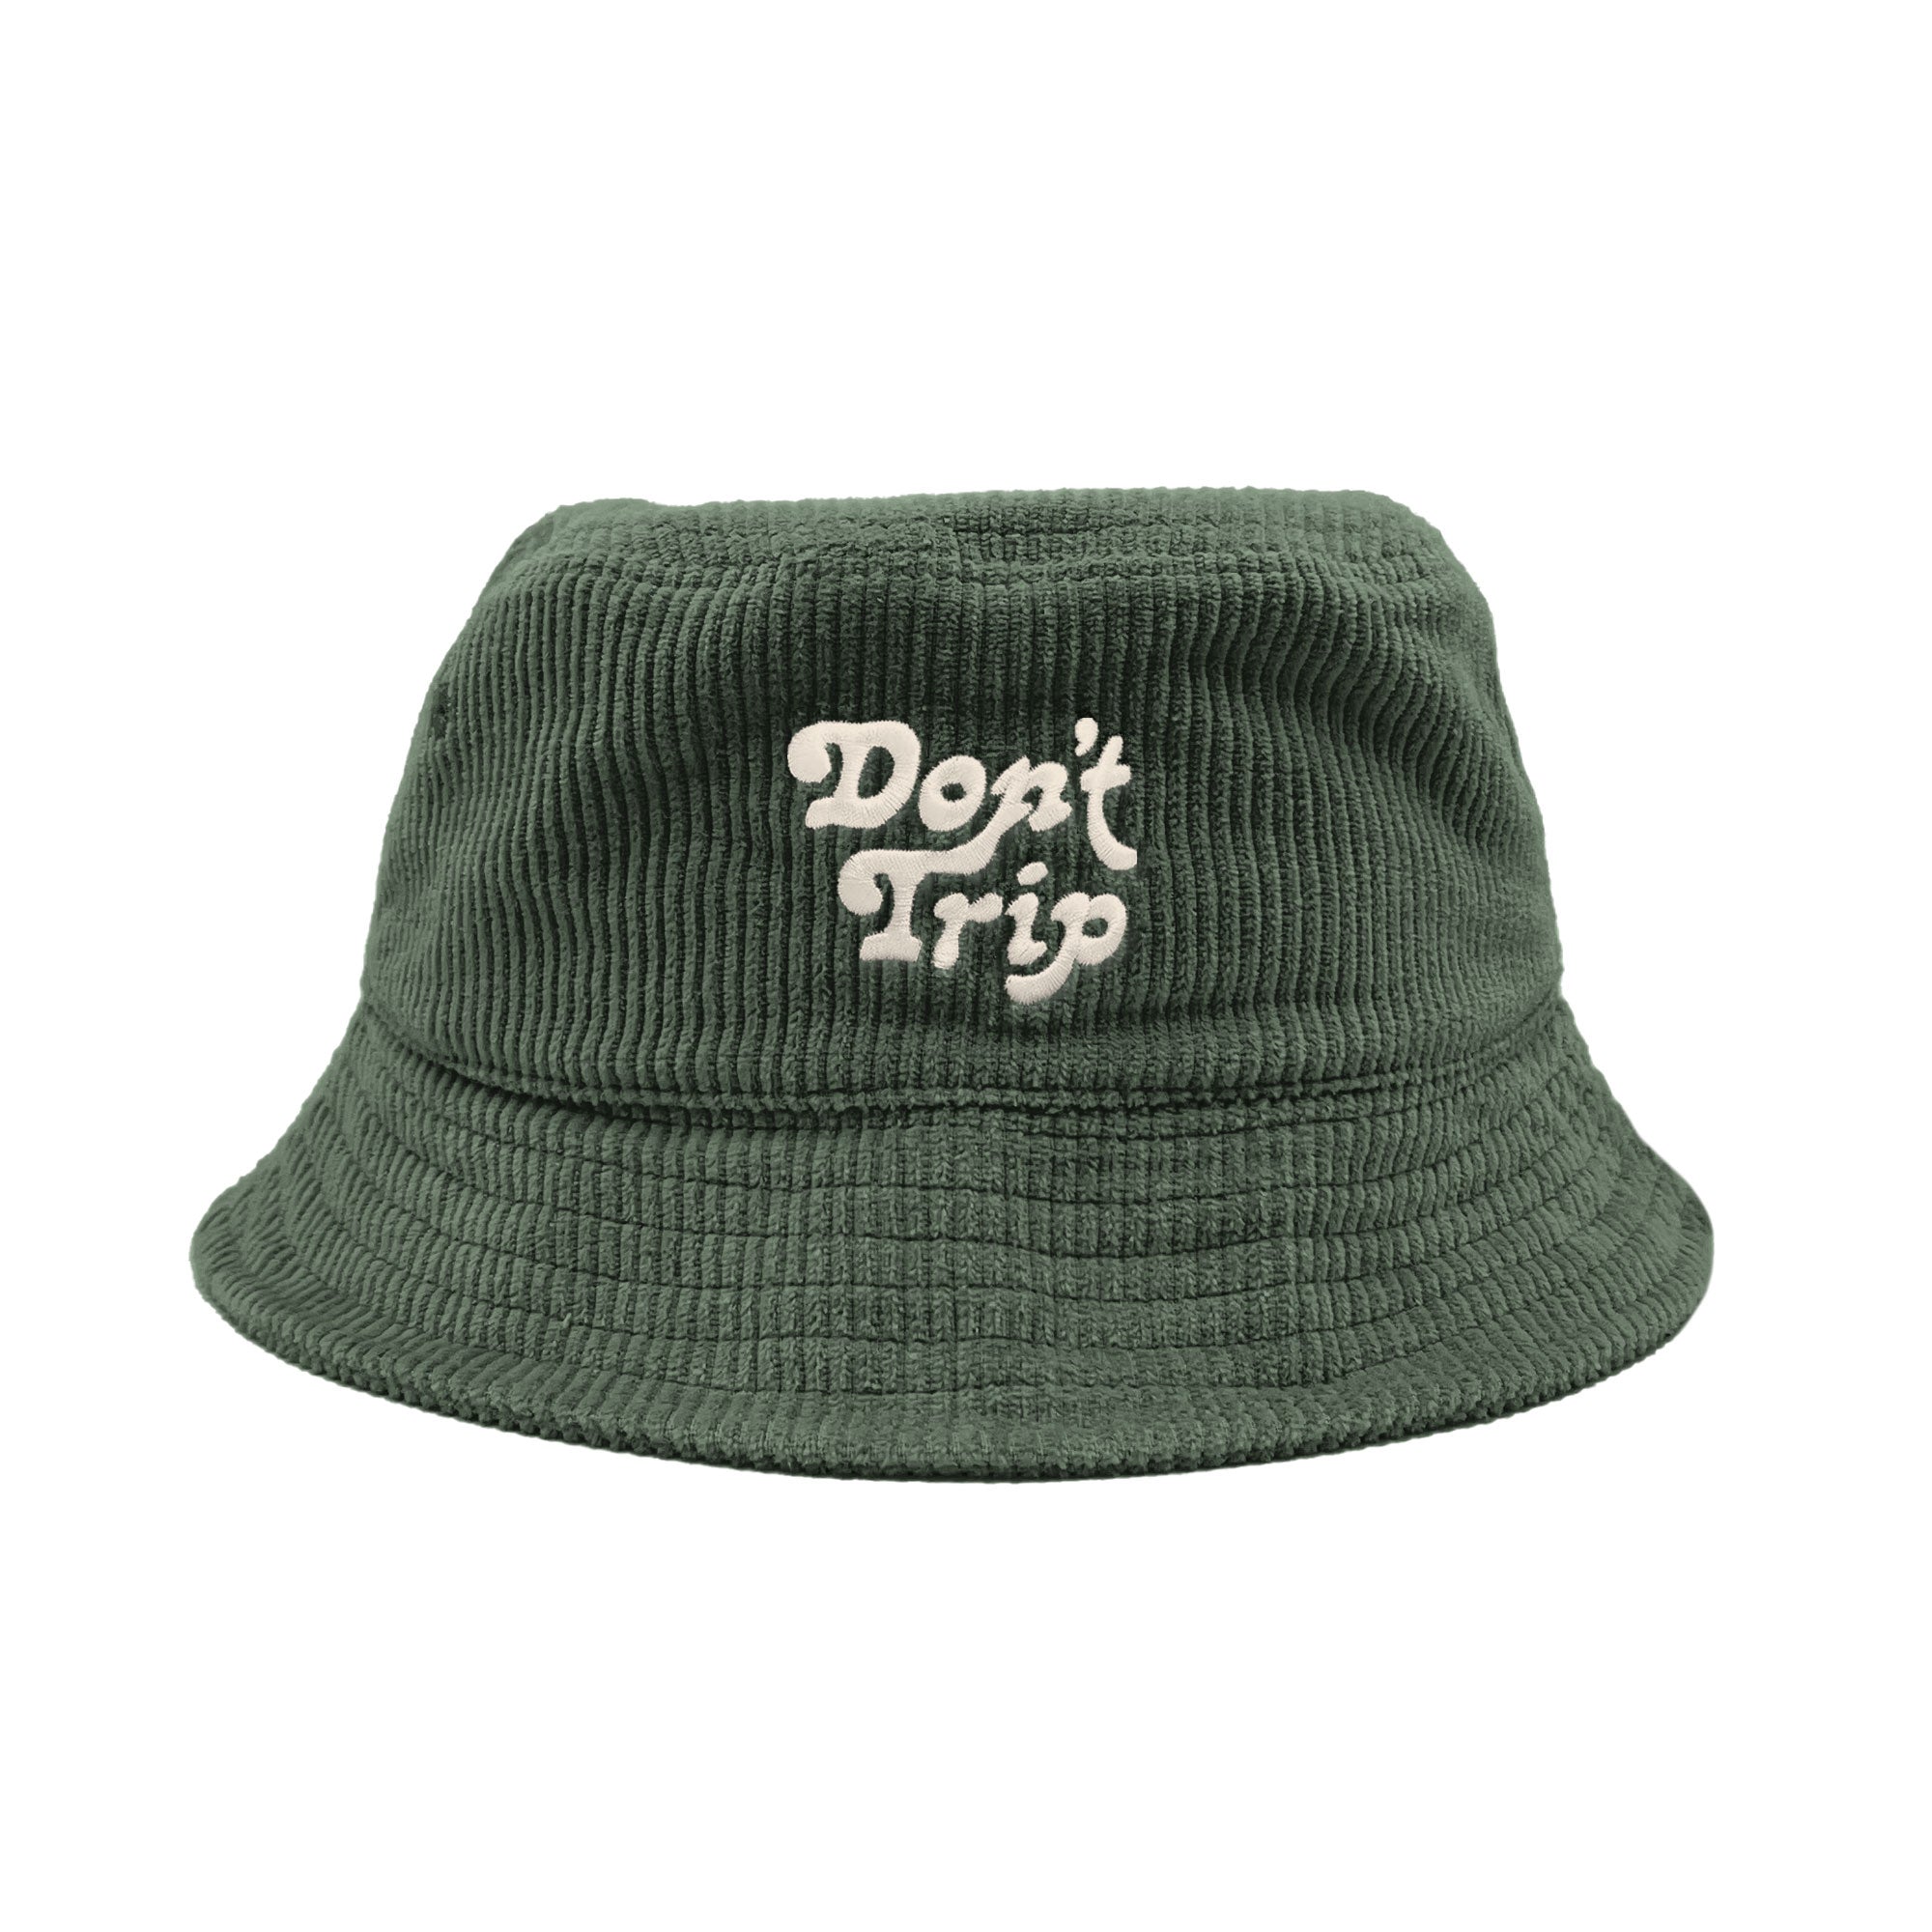 Free & Easy Don't Trip Fat Corduroy Bucket Hat in olive with white Don't Trip embroidery on a white background - Free & Easy